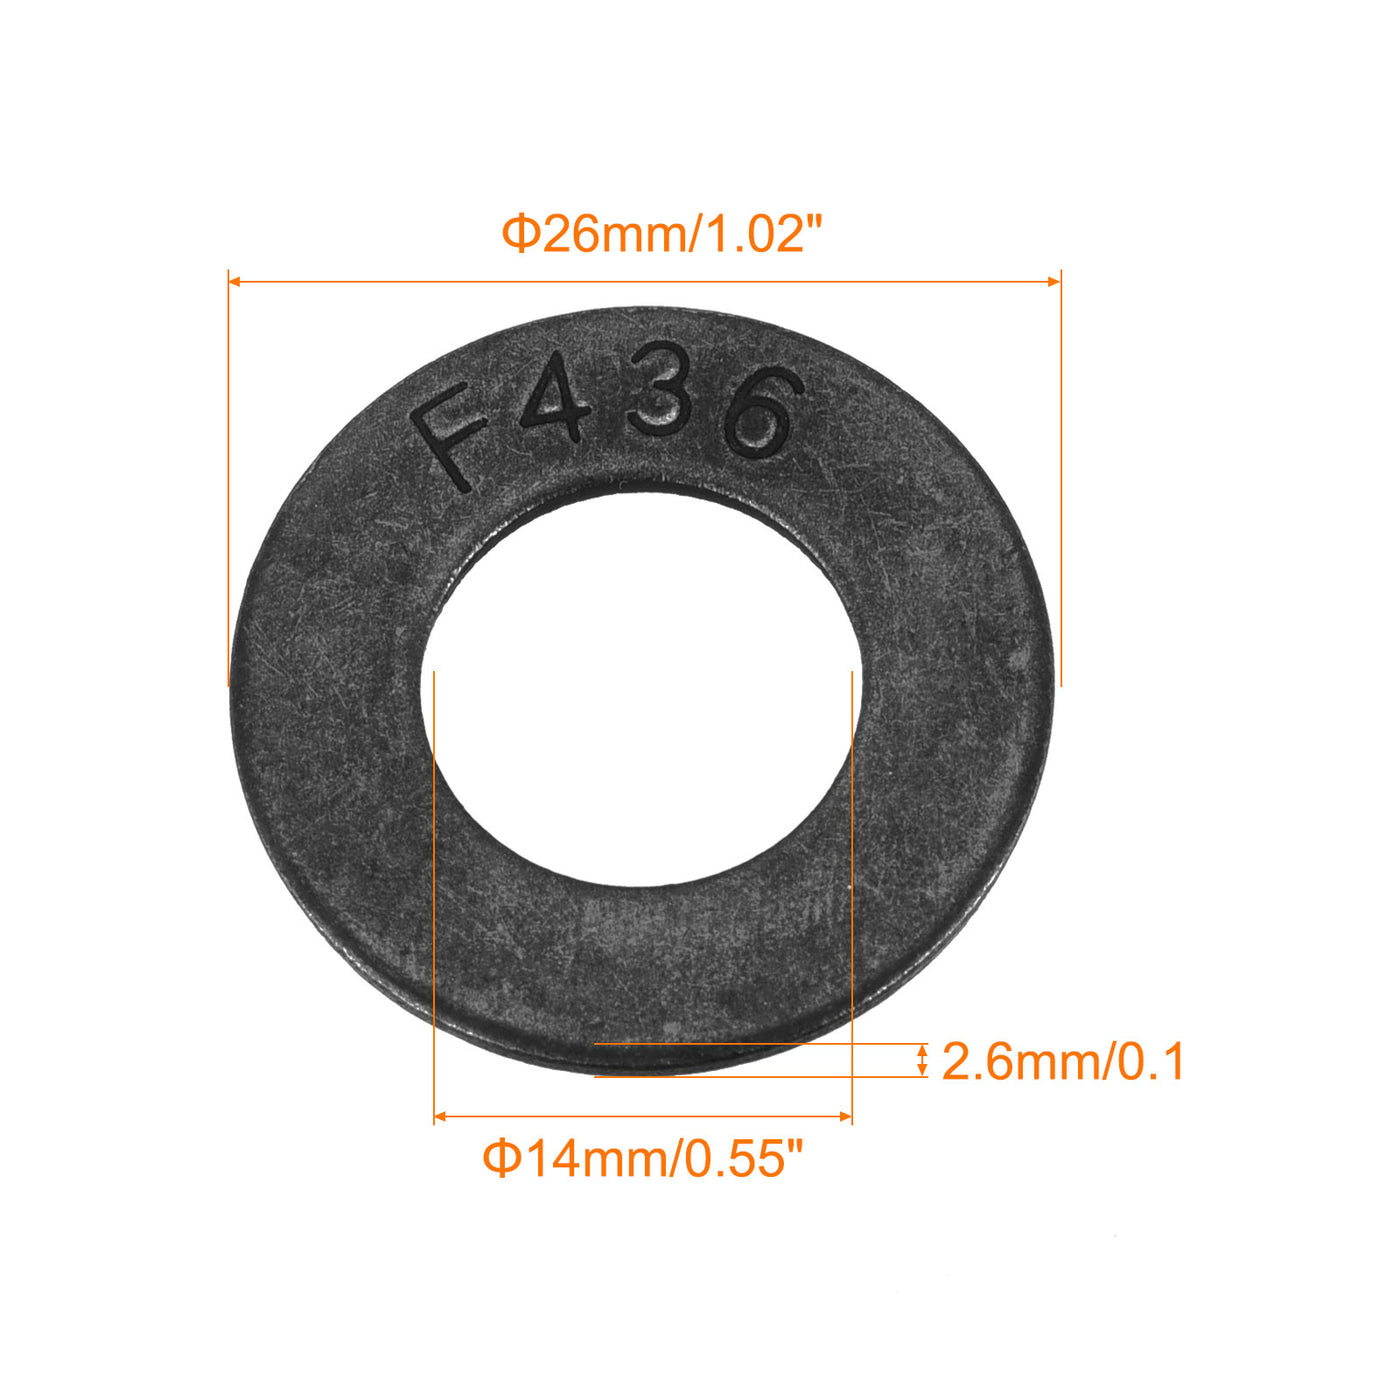 uxcell Uxcell 1/2-Inch Flat Washer, Alloy Steel Black Oxide Finish Pack of 25